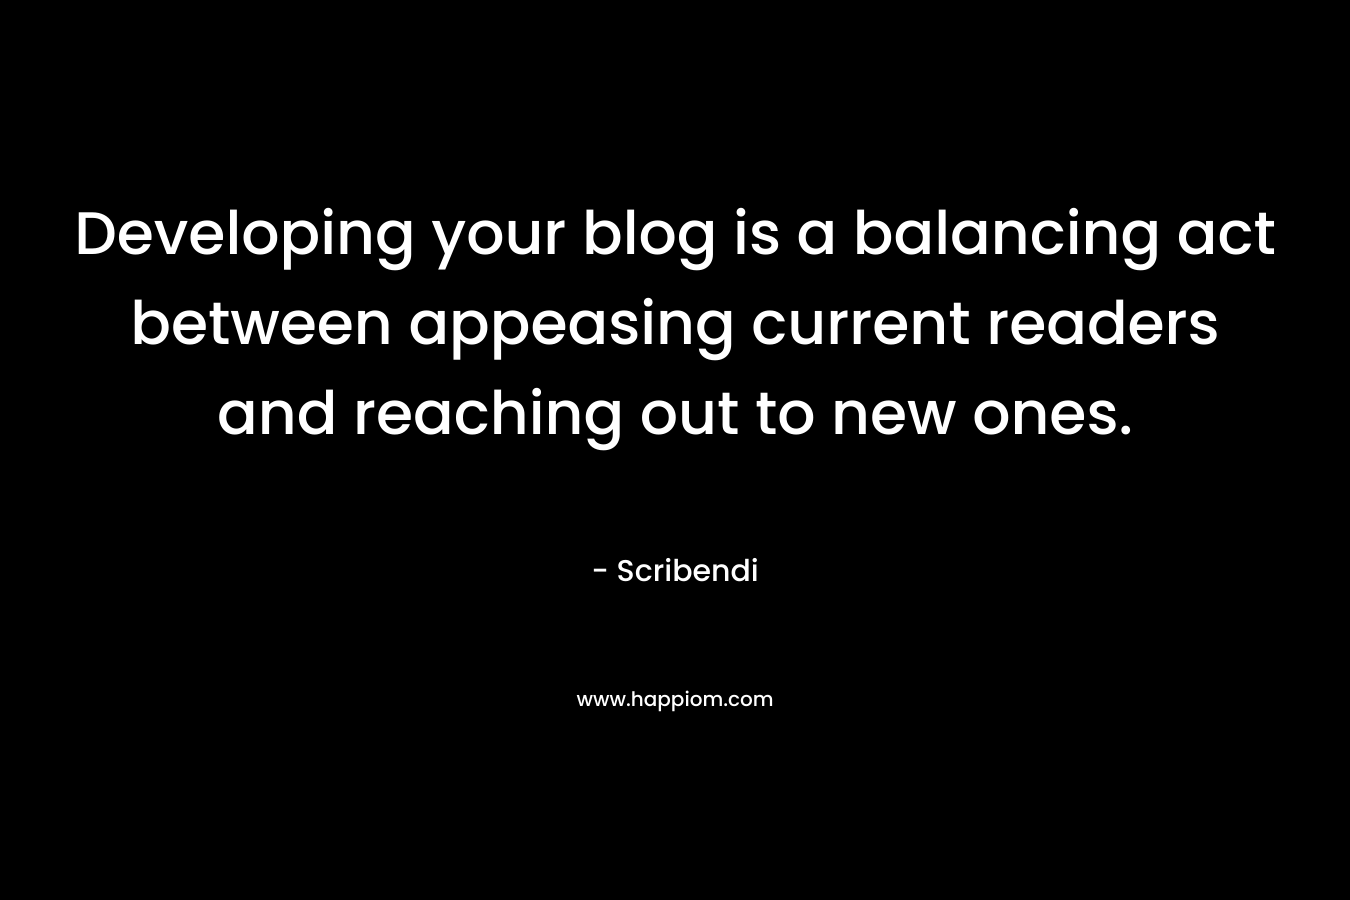 Developing your blog is a balancing act between appeasing current readers and reaching out to new ones.